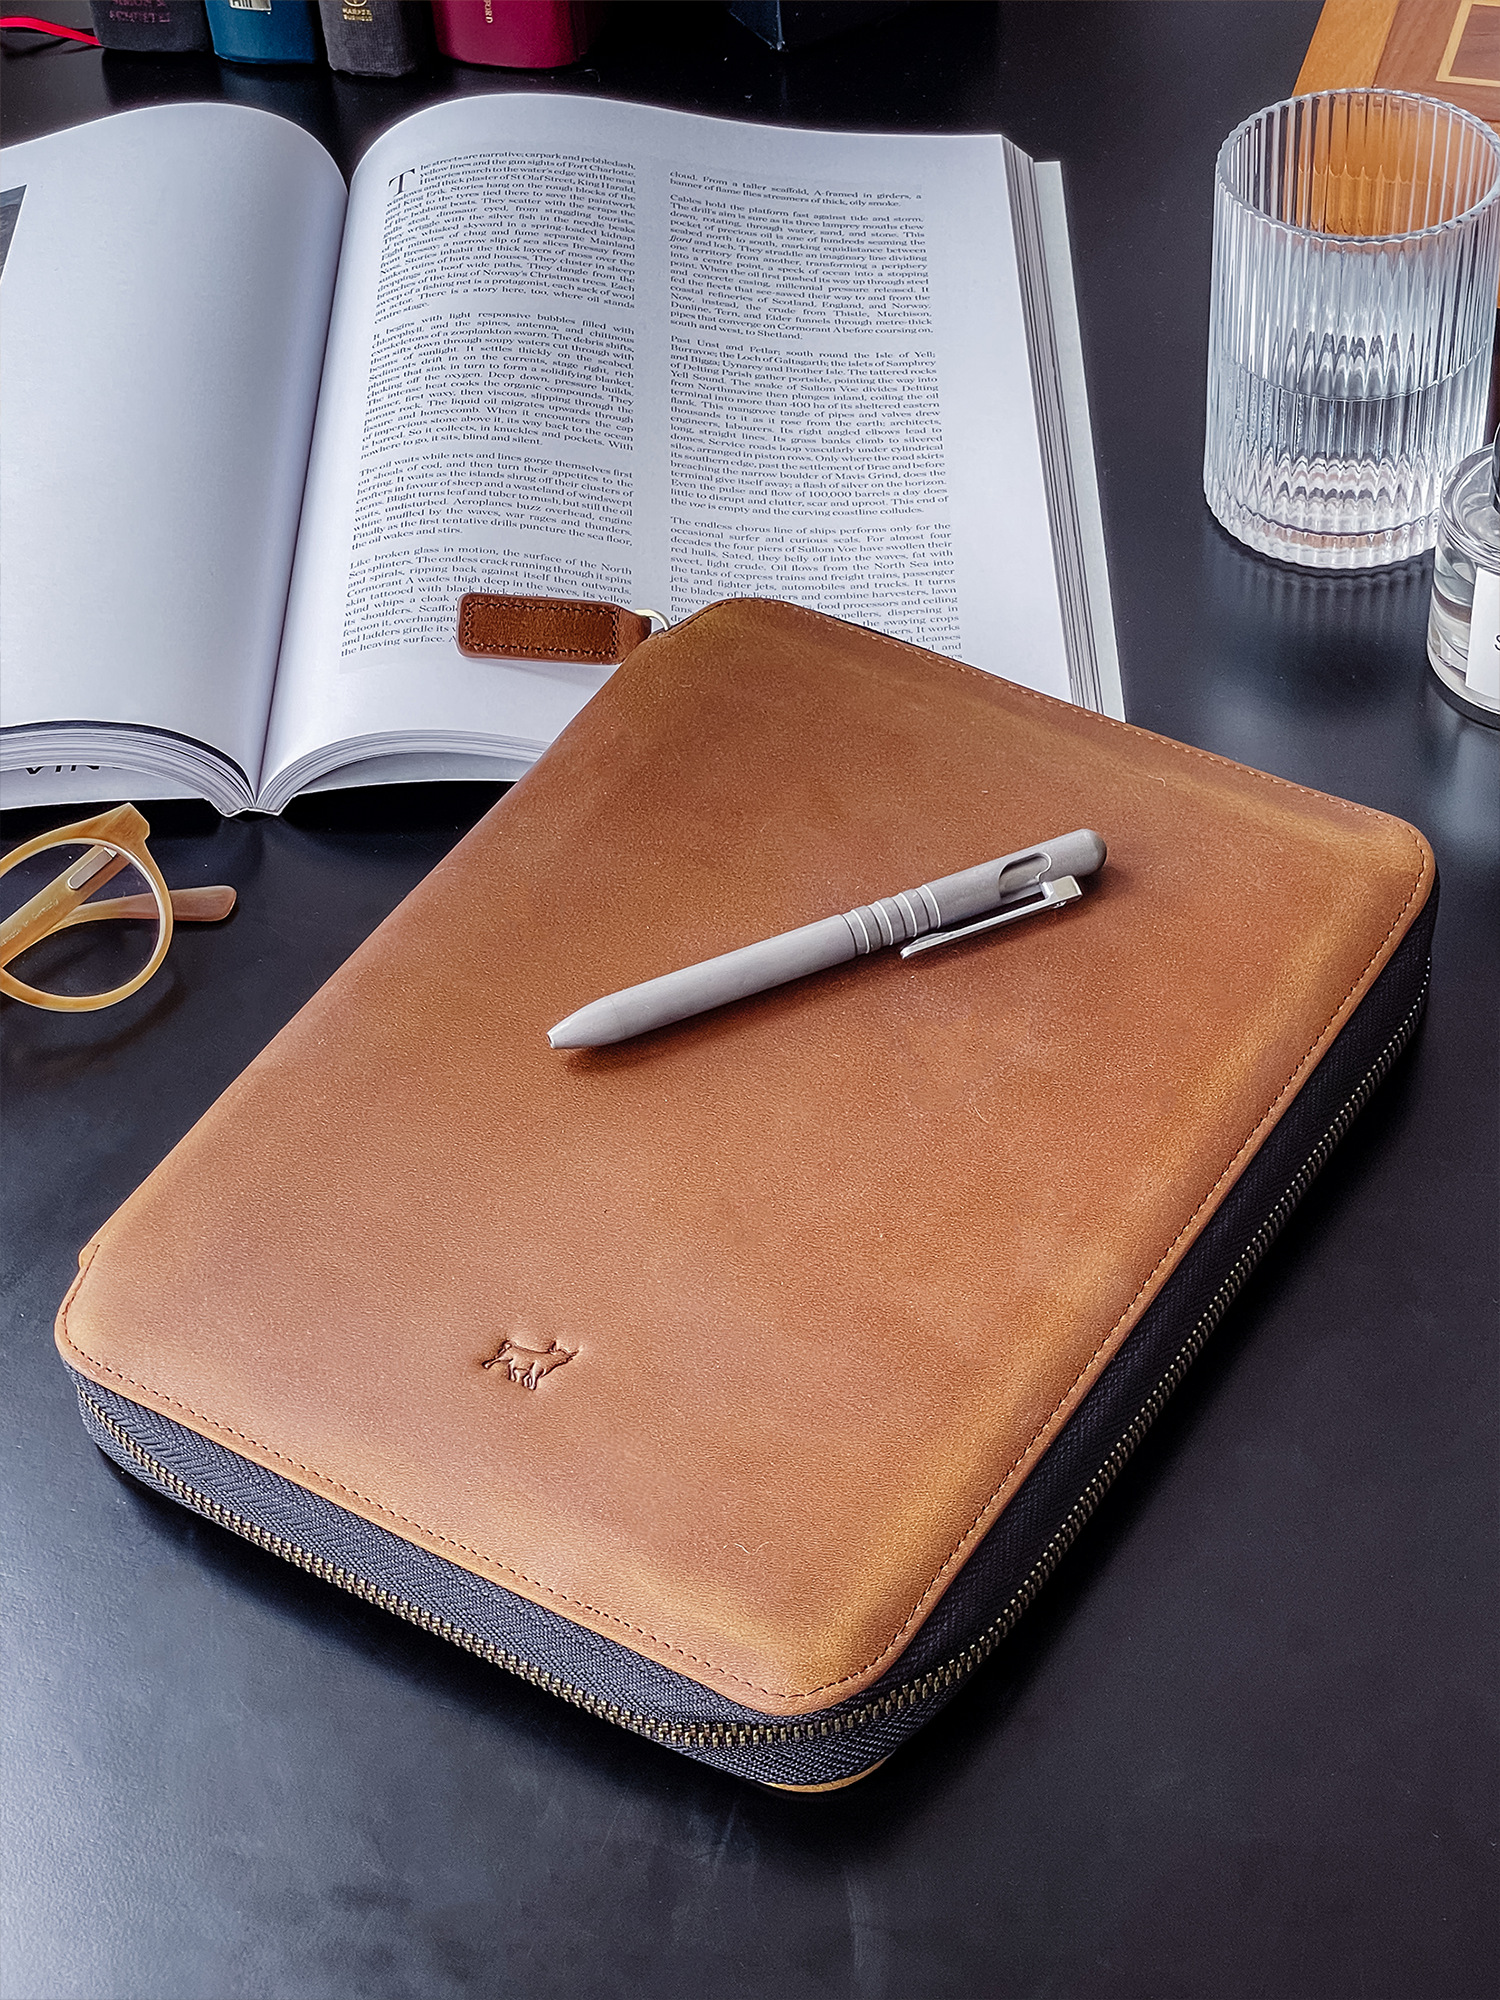 Closed leather notebook with pen on top beside an open book and eyeglasses on a desk.